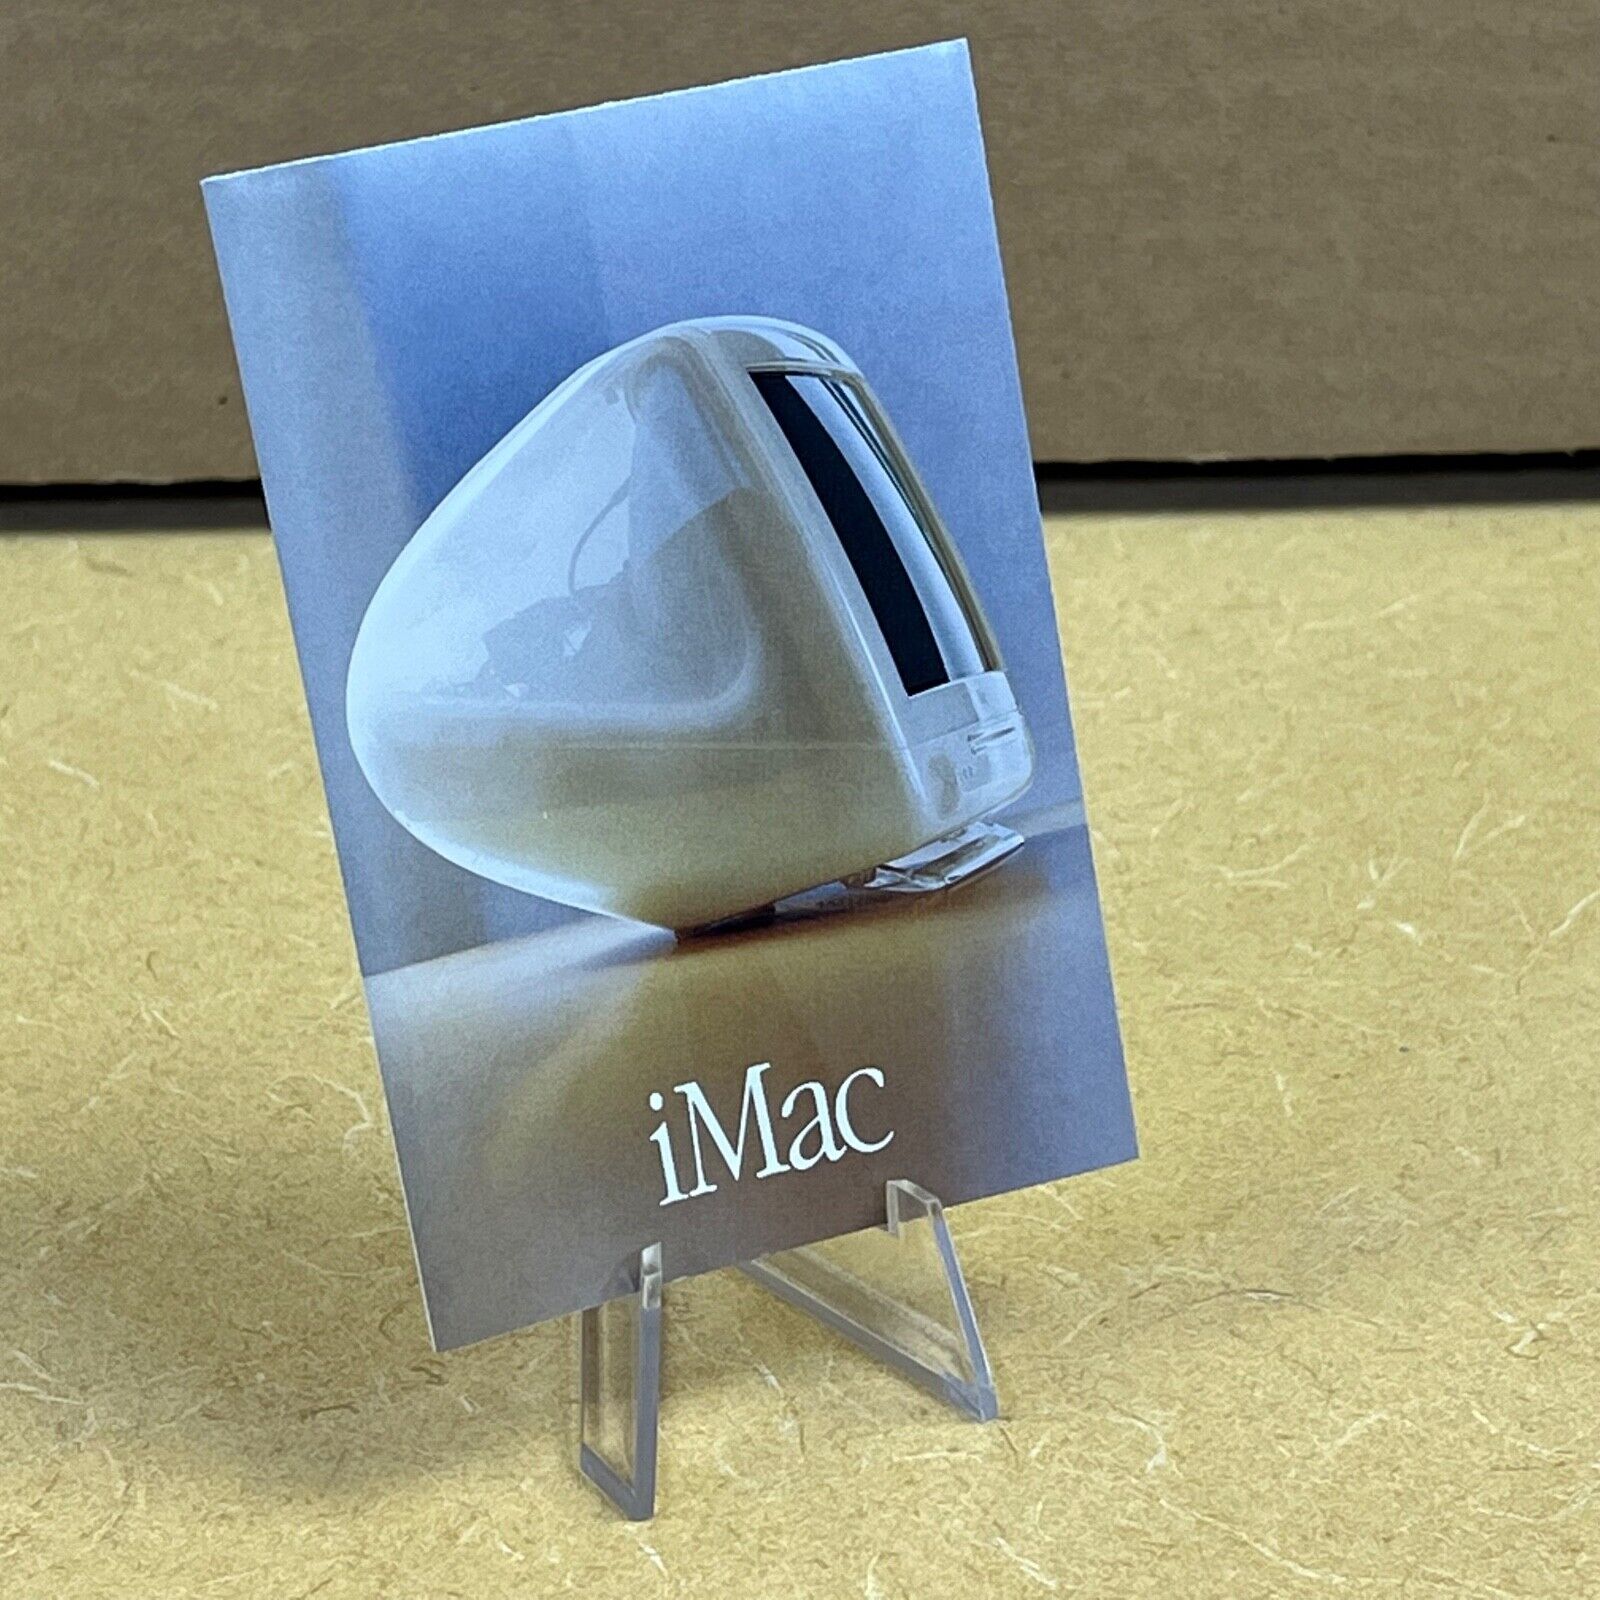 MINT Brochure iMac from Apple Computer Store Macintosh - 23 years old, from 2001